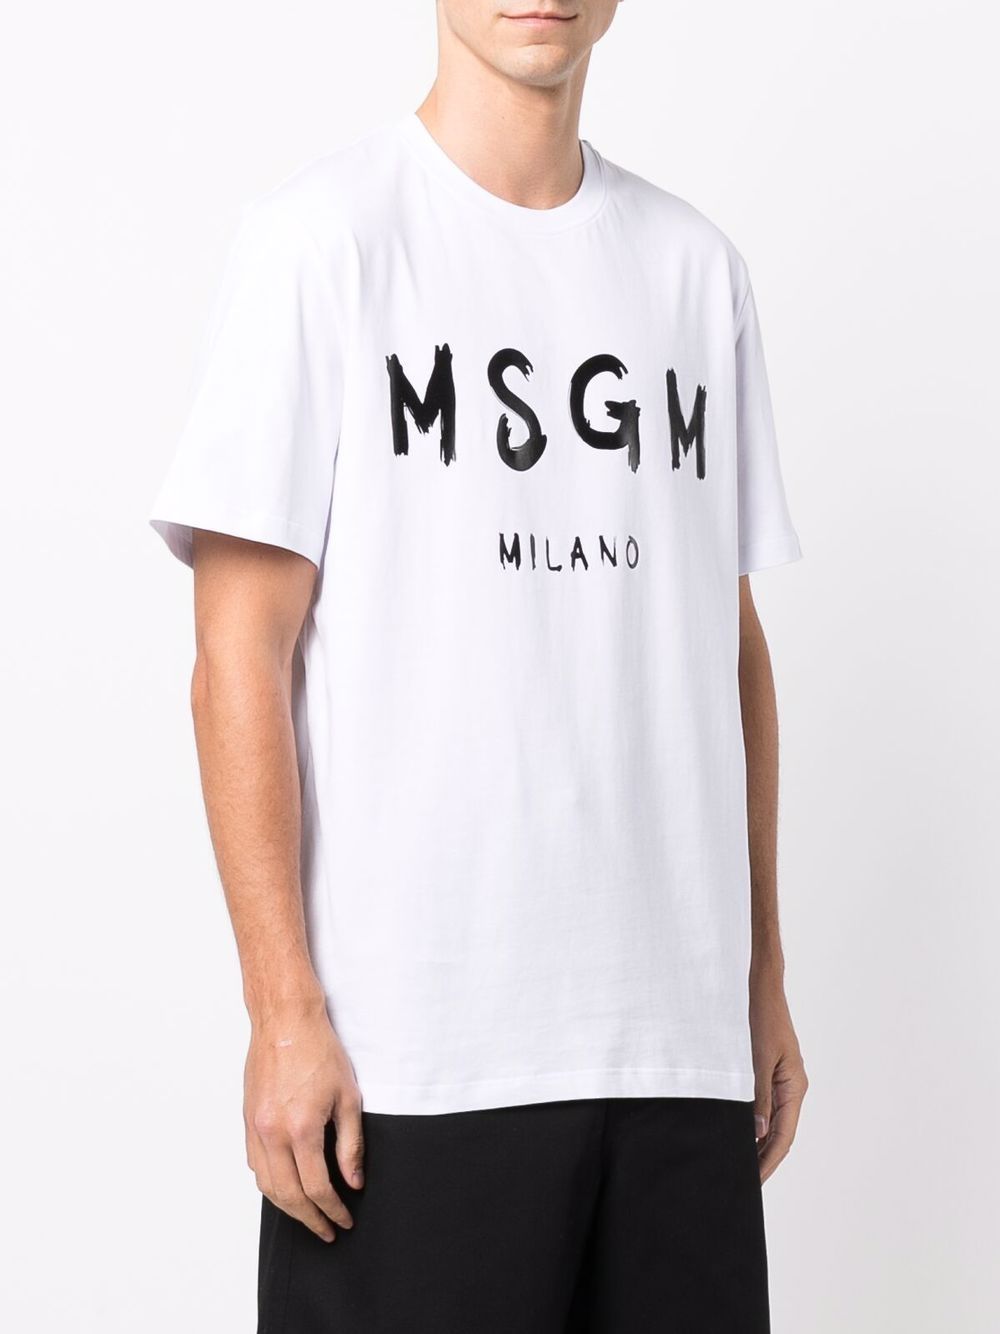 Shop MSGM logo-print cotton T-shirt with Express Delivery - FARFETCH